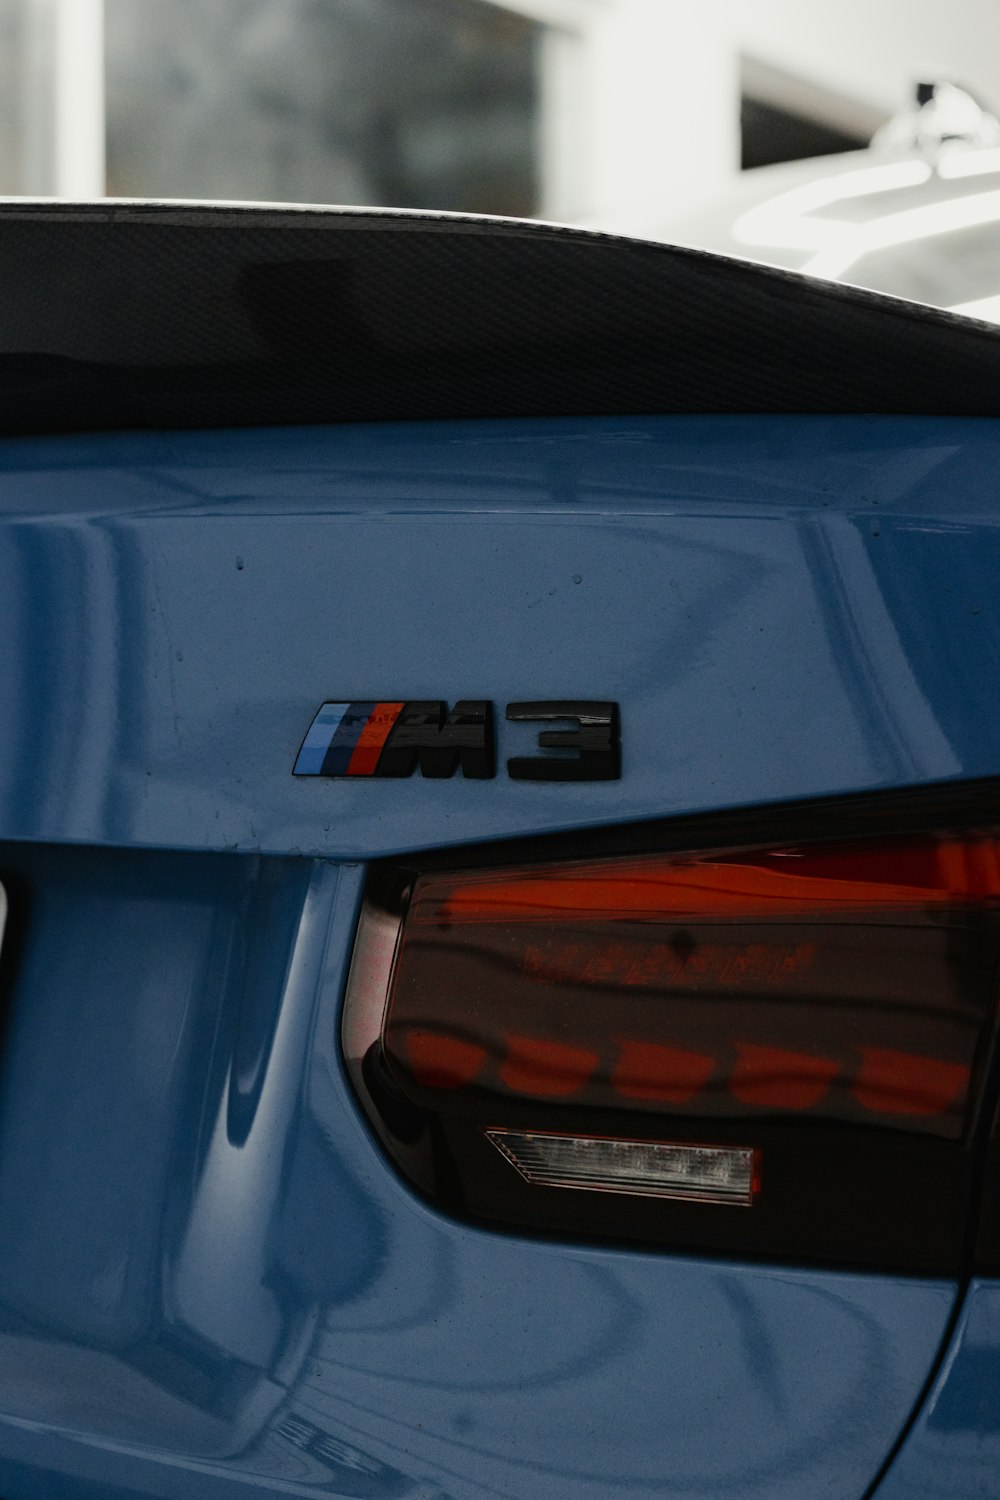 a close up of the rear end of a blue car